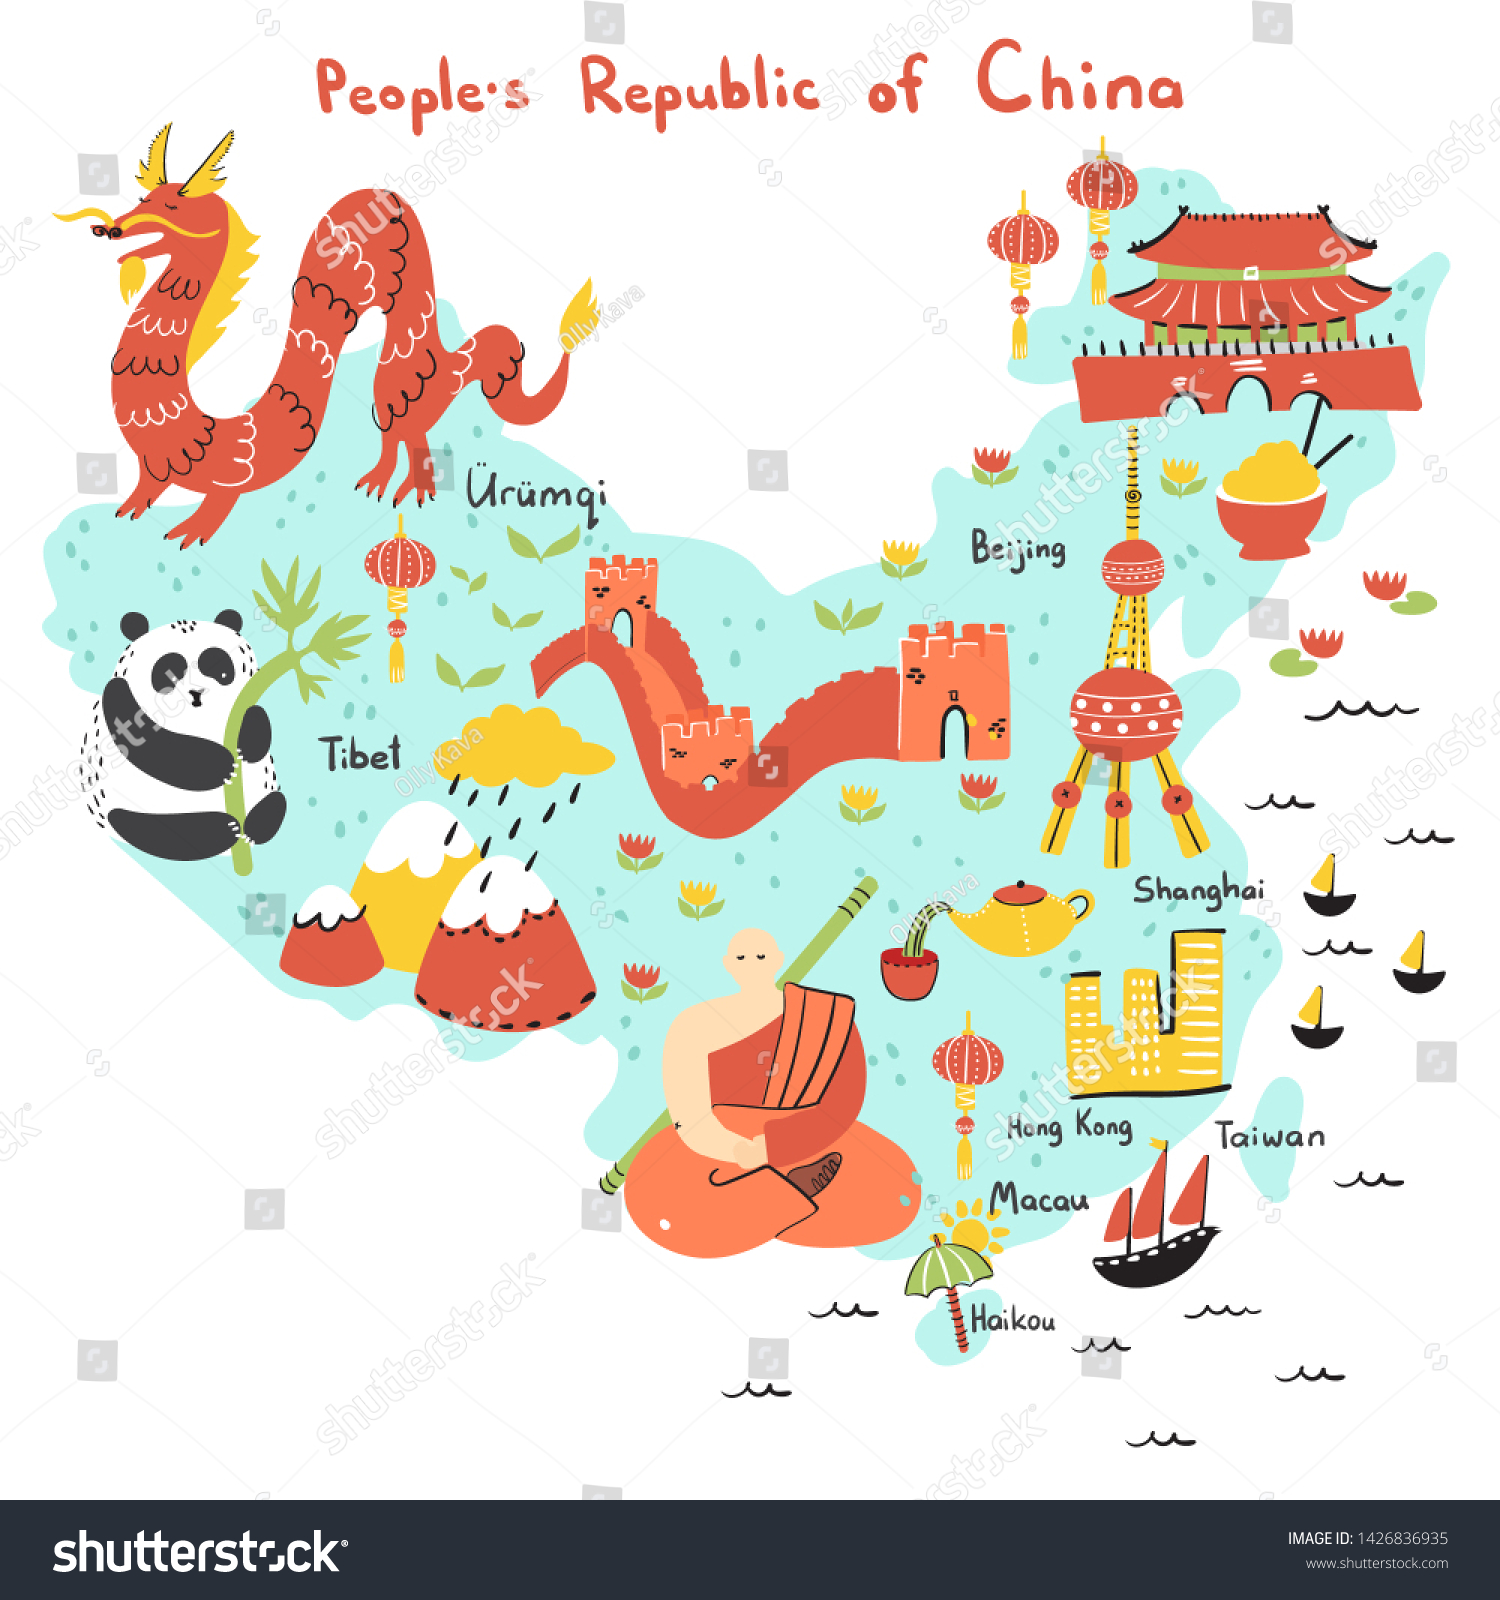 Hand drawn map of People's Republic of China - Royalty Free Stock ...